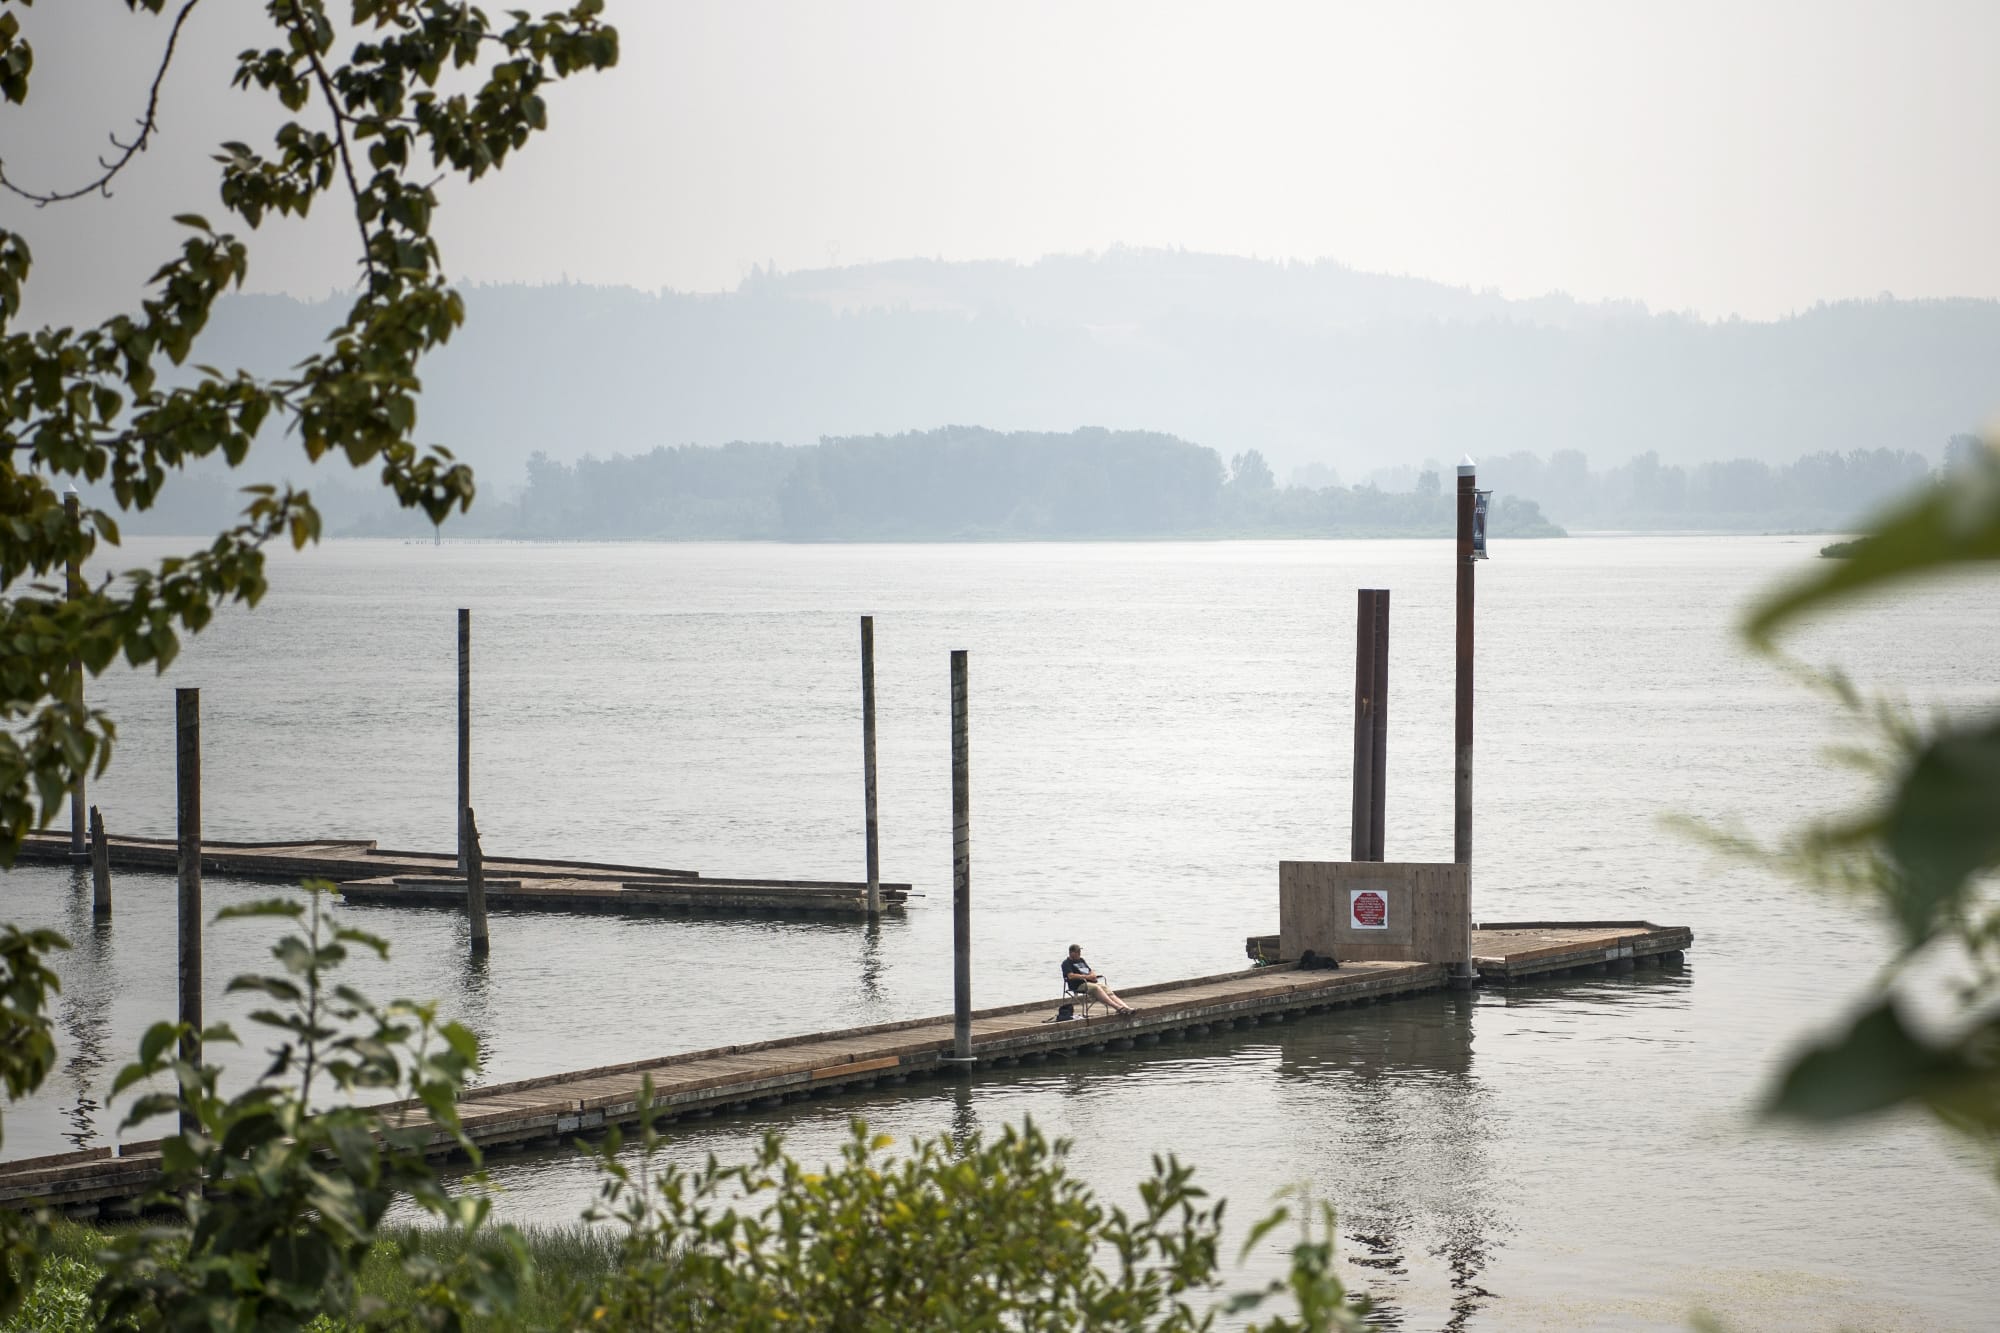 Randy Rolene of Vancouver relaxes with his dog, Bella, and fishes off of the dock at Steamboat Landing Park in Washougal on Tuesday. Rolene said he decided to come out to the river to take his dog for a swim, but he'll probably head home early because of the smoke. "It's nasty," he said.